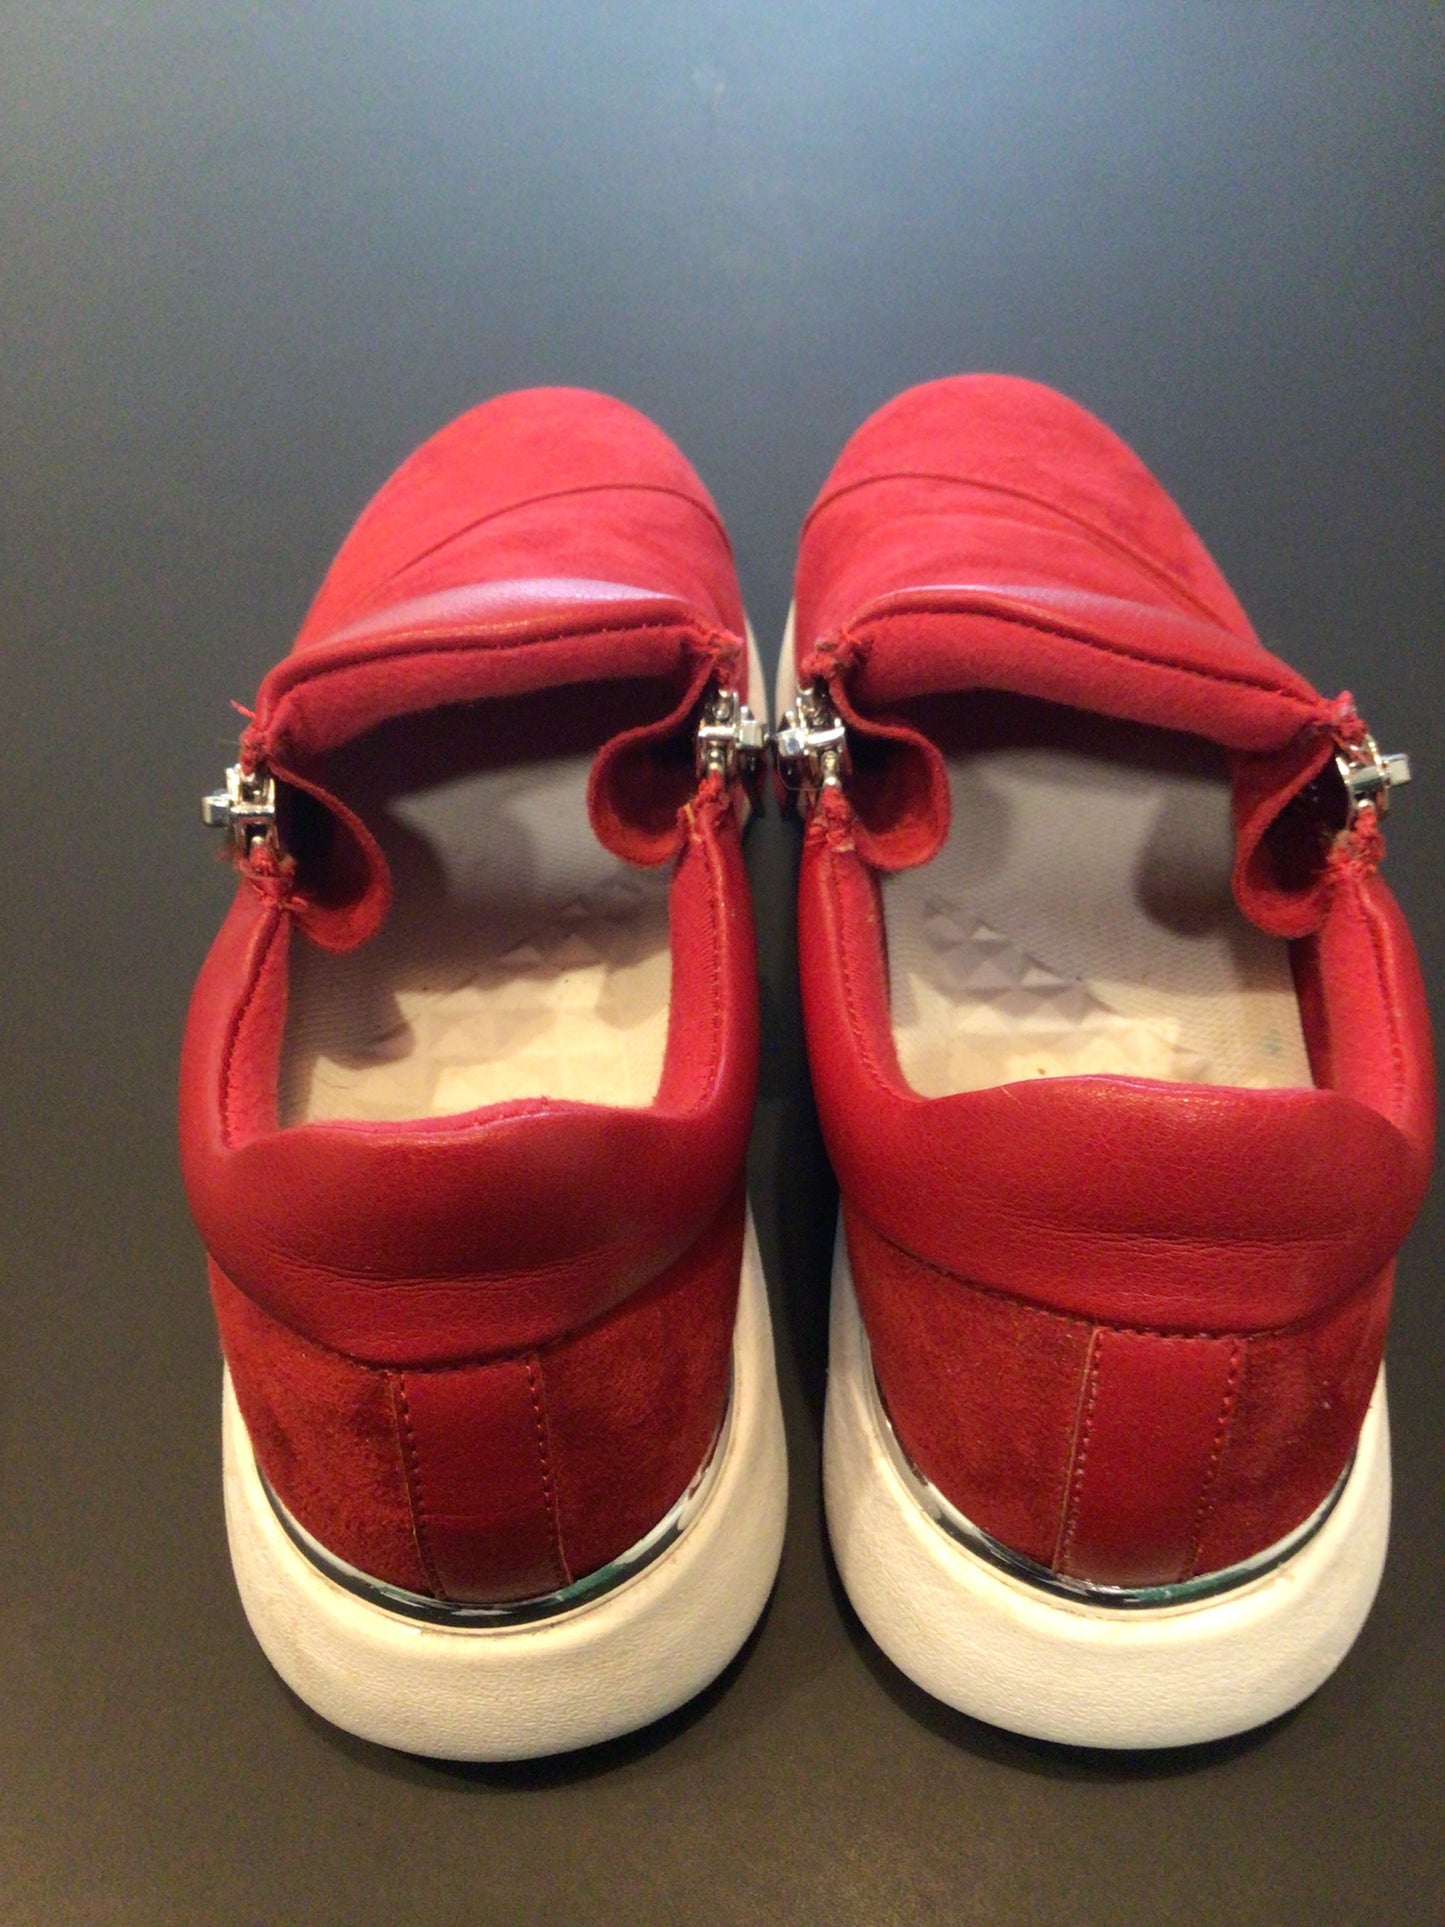 Consignment 2206-12 Aldo red casual shoes. Size 37.